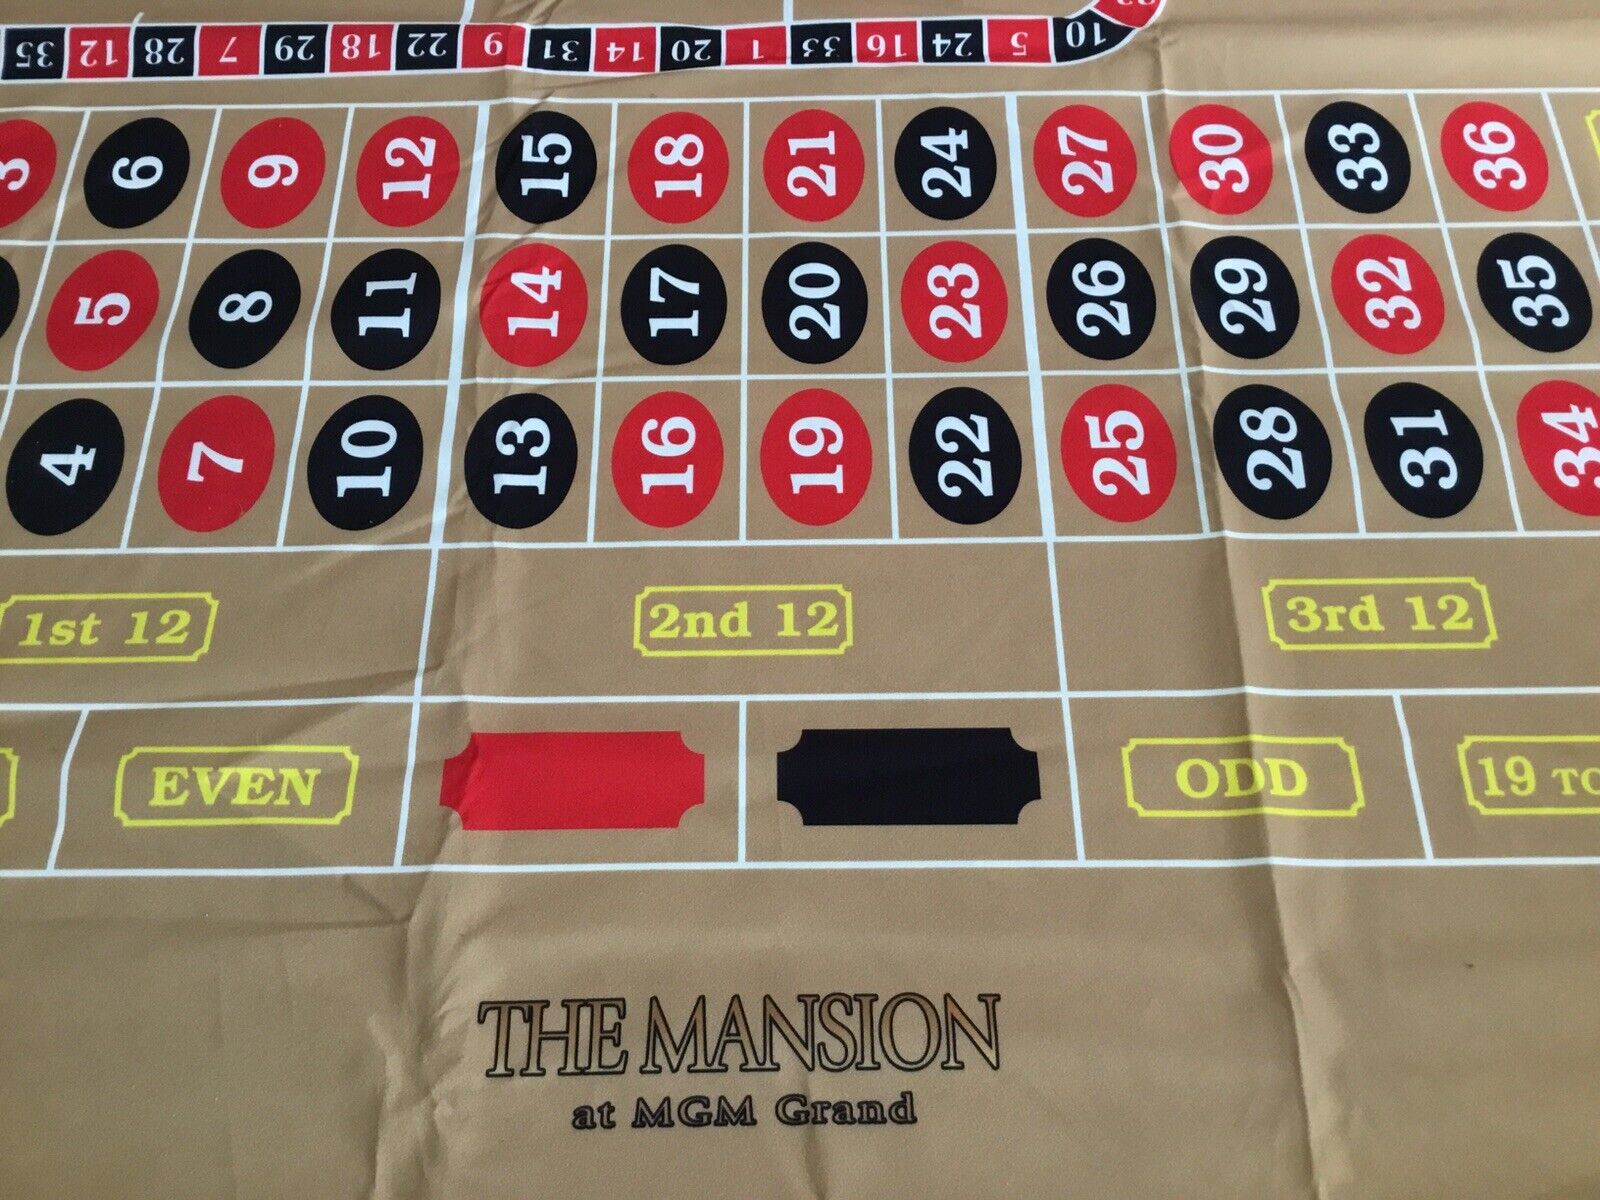 Mgm Grand casino the mamsion single zero roulette table felt Layout Brand New